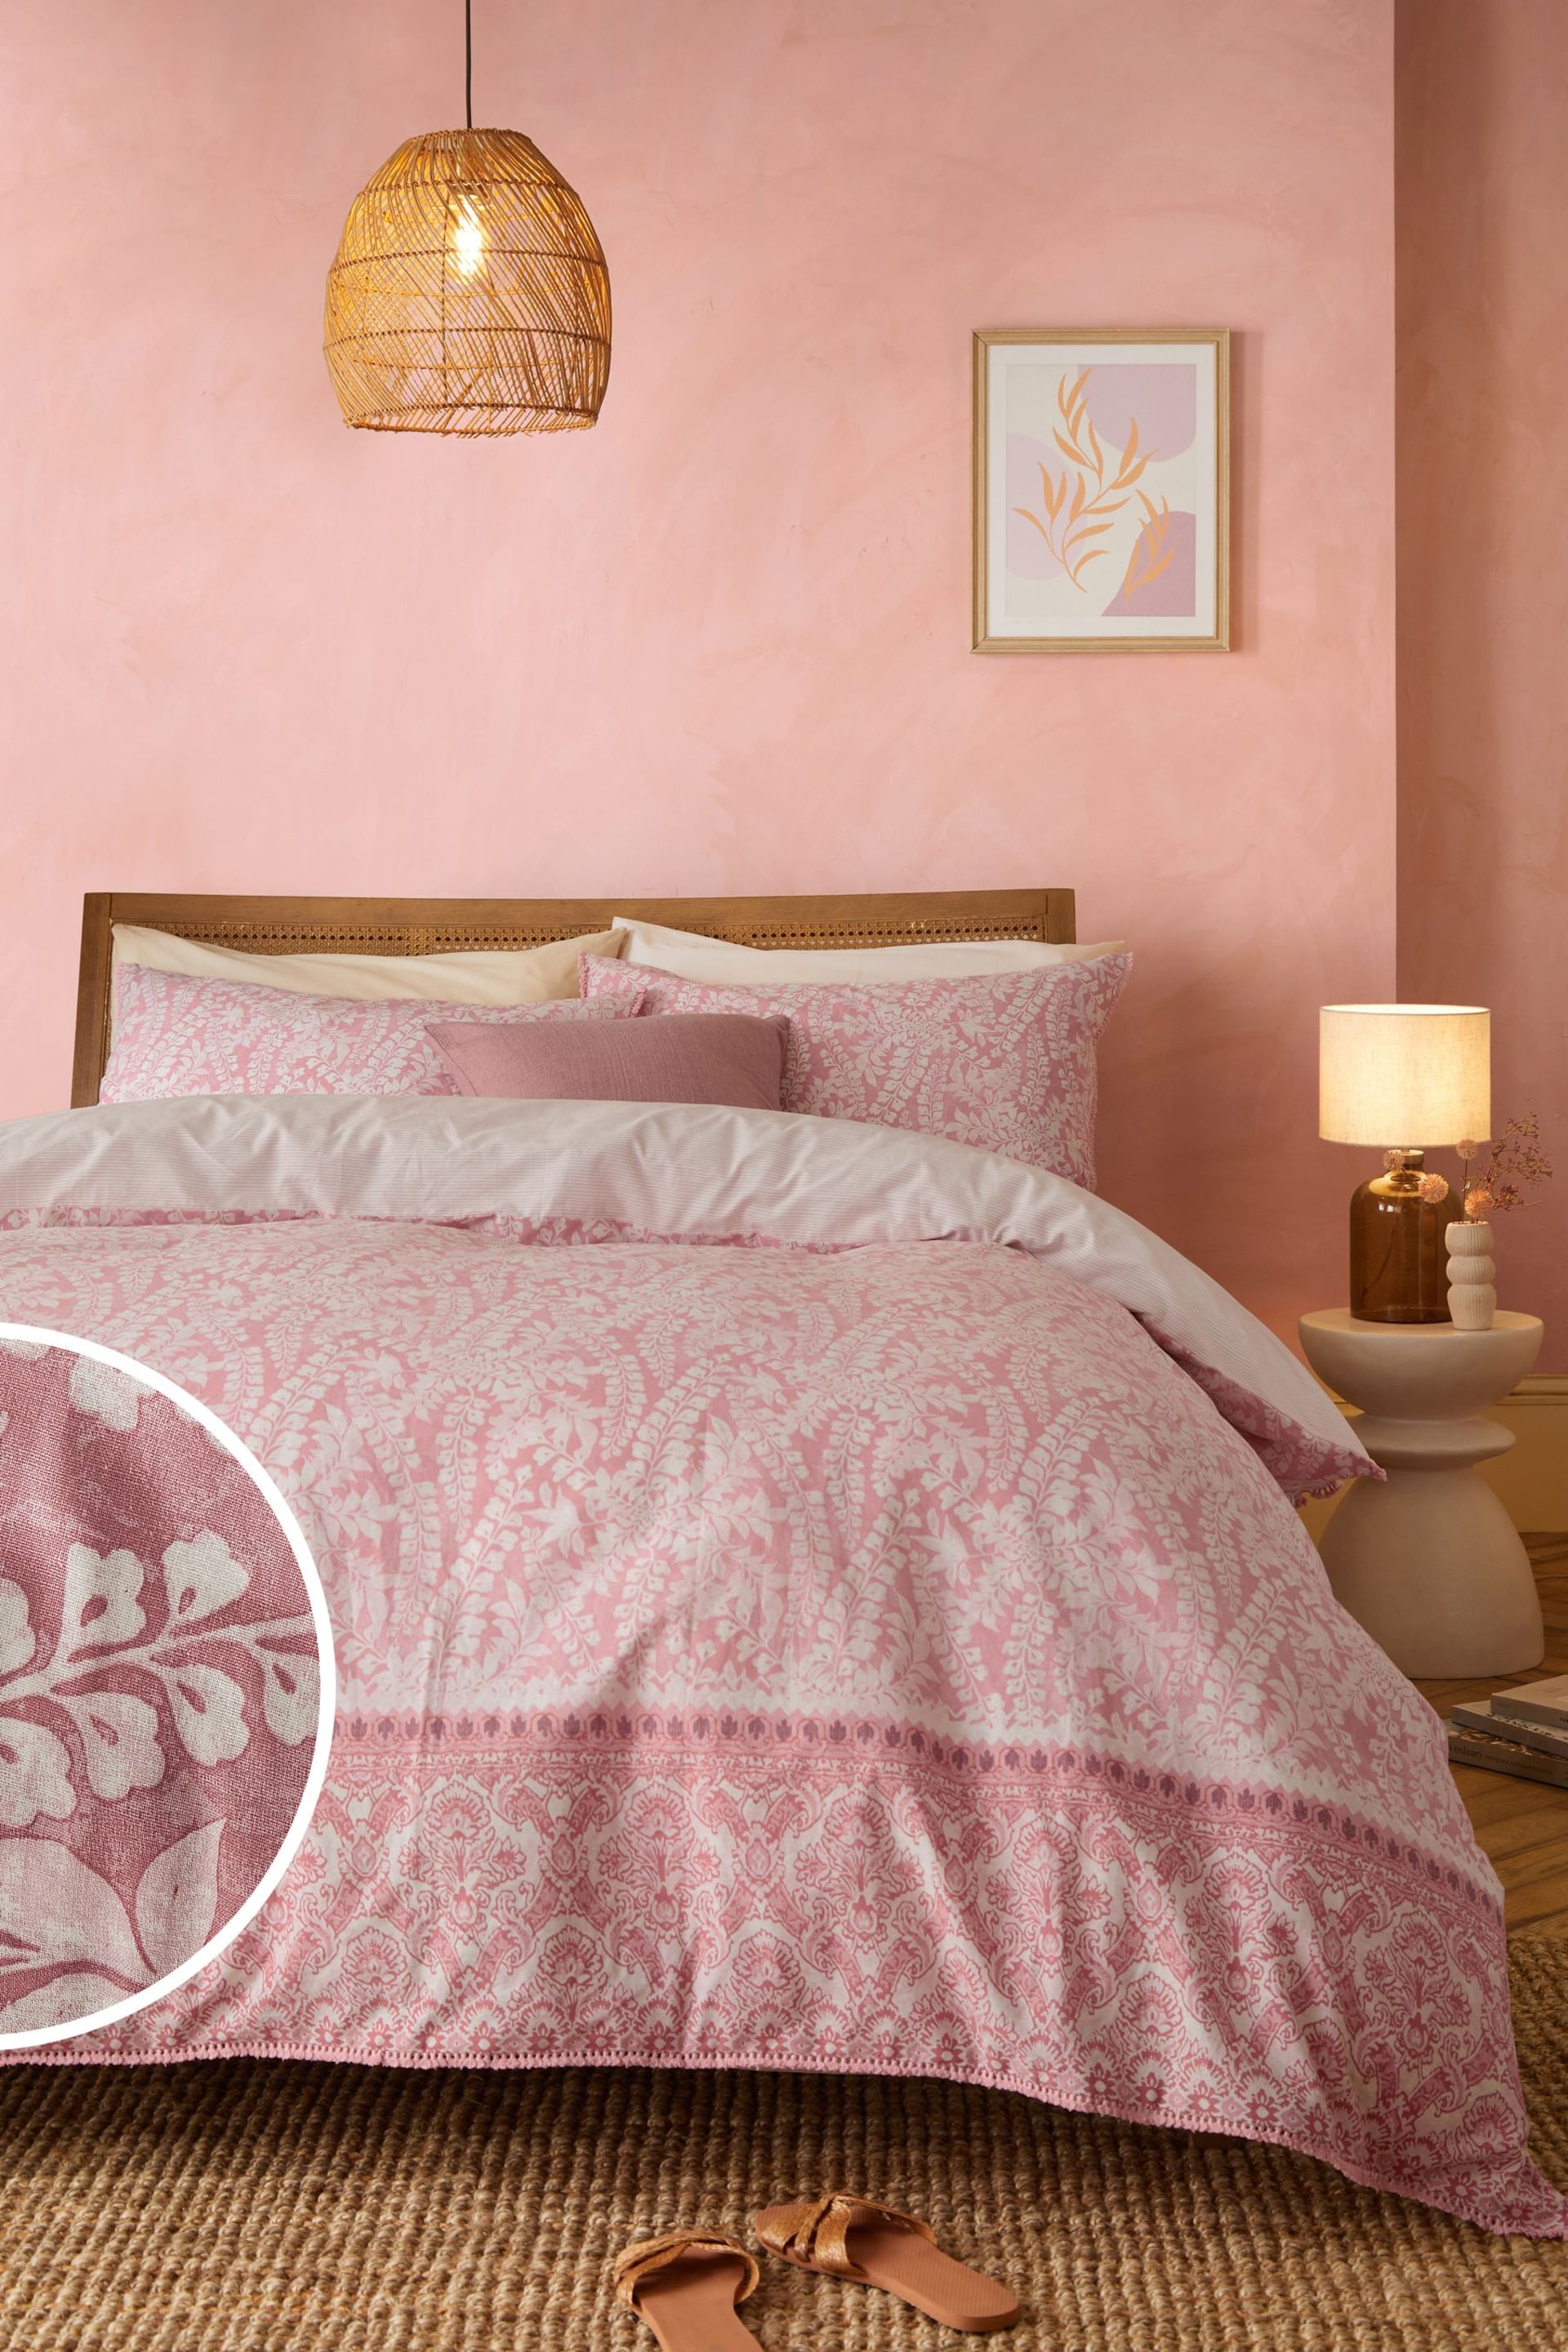 Pink Woodblock Reversible 100% Cotton Duvet Cover and Pillowcase Set - Image 1 of 8